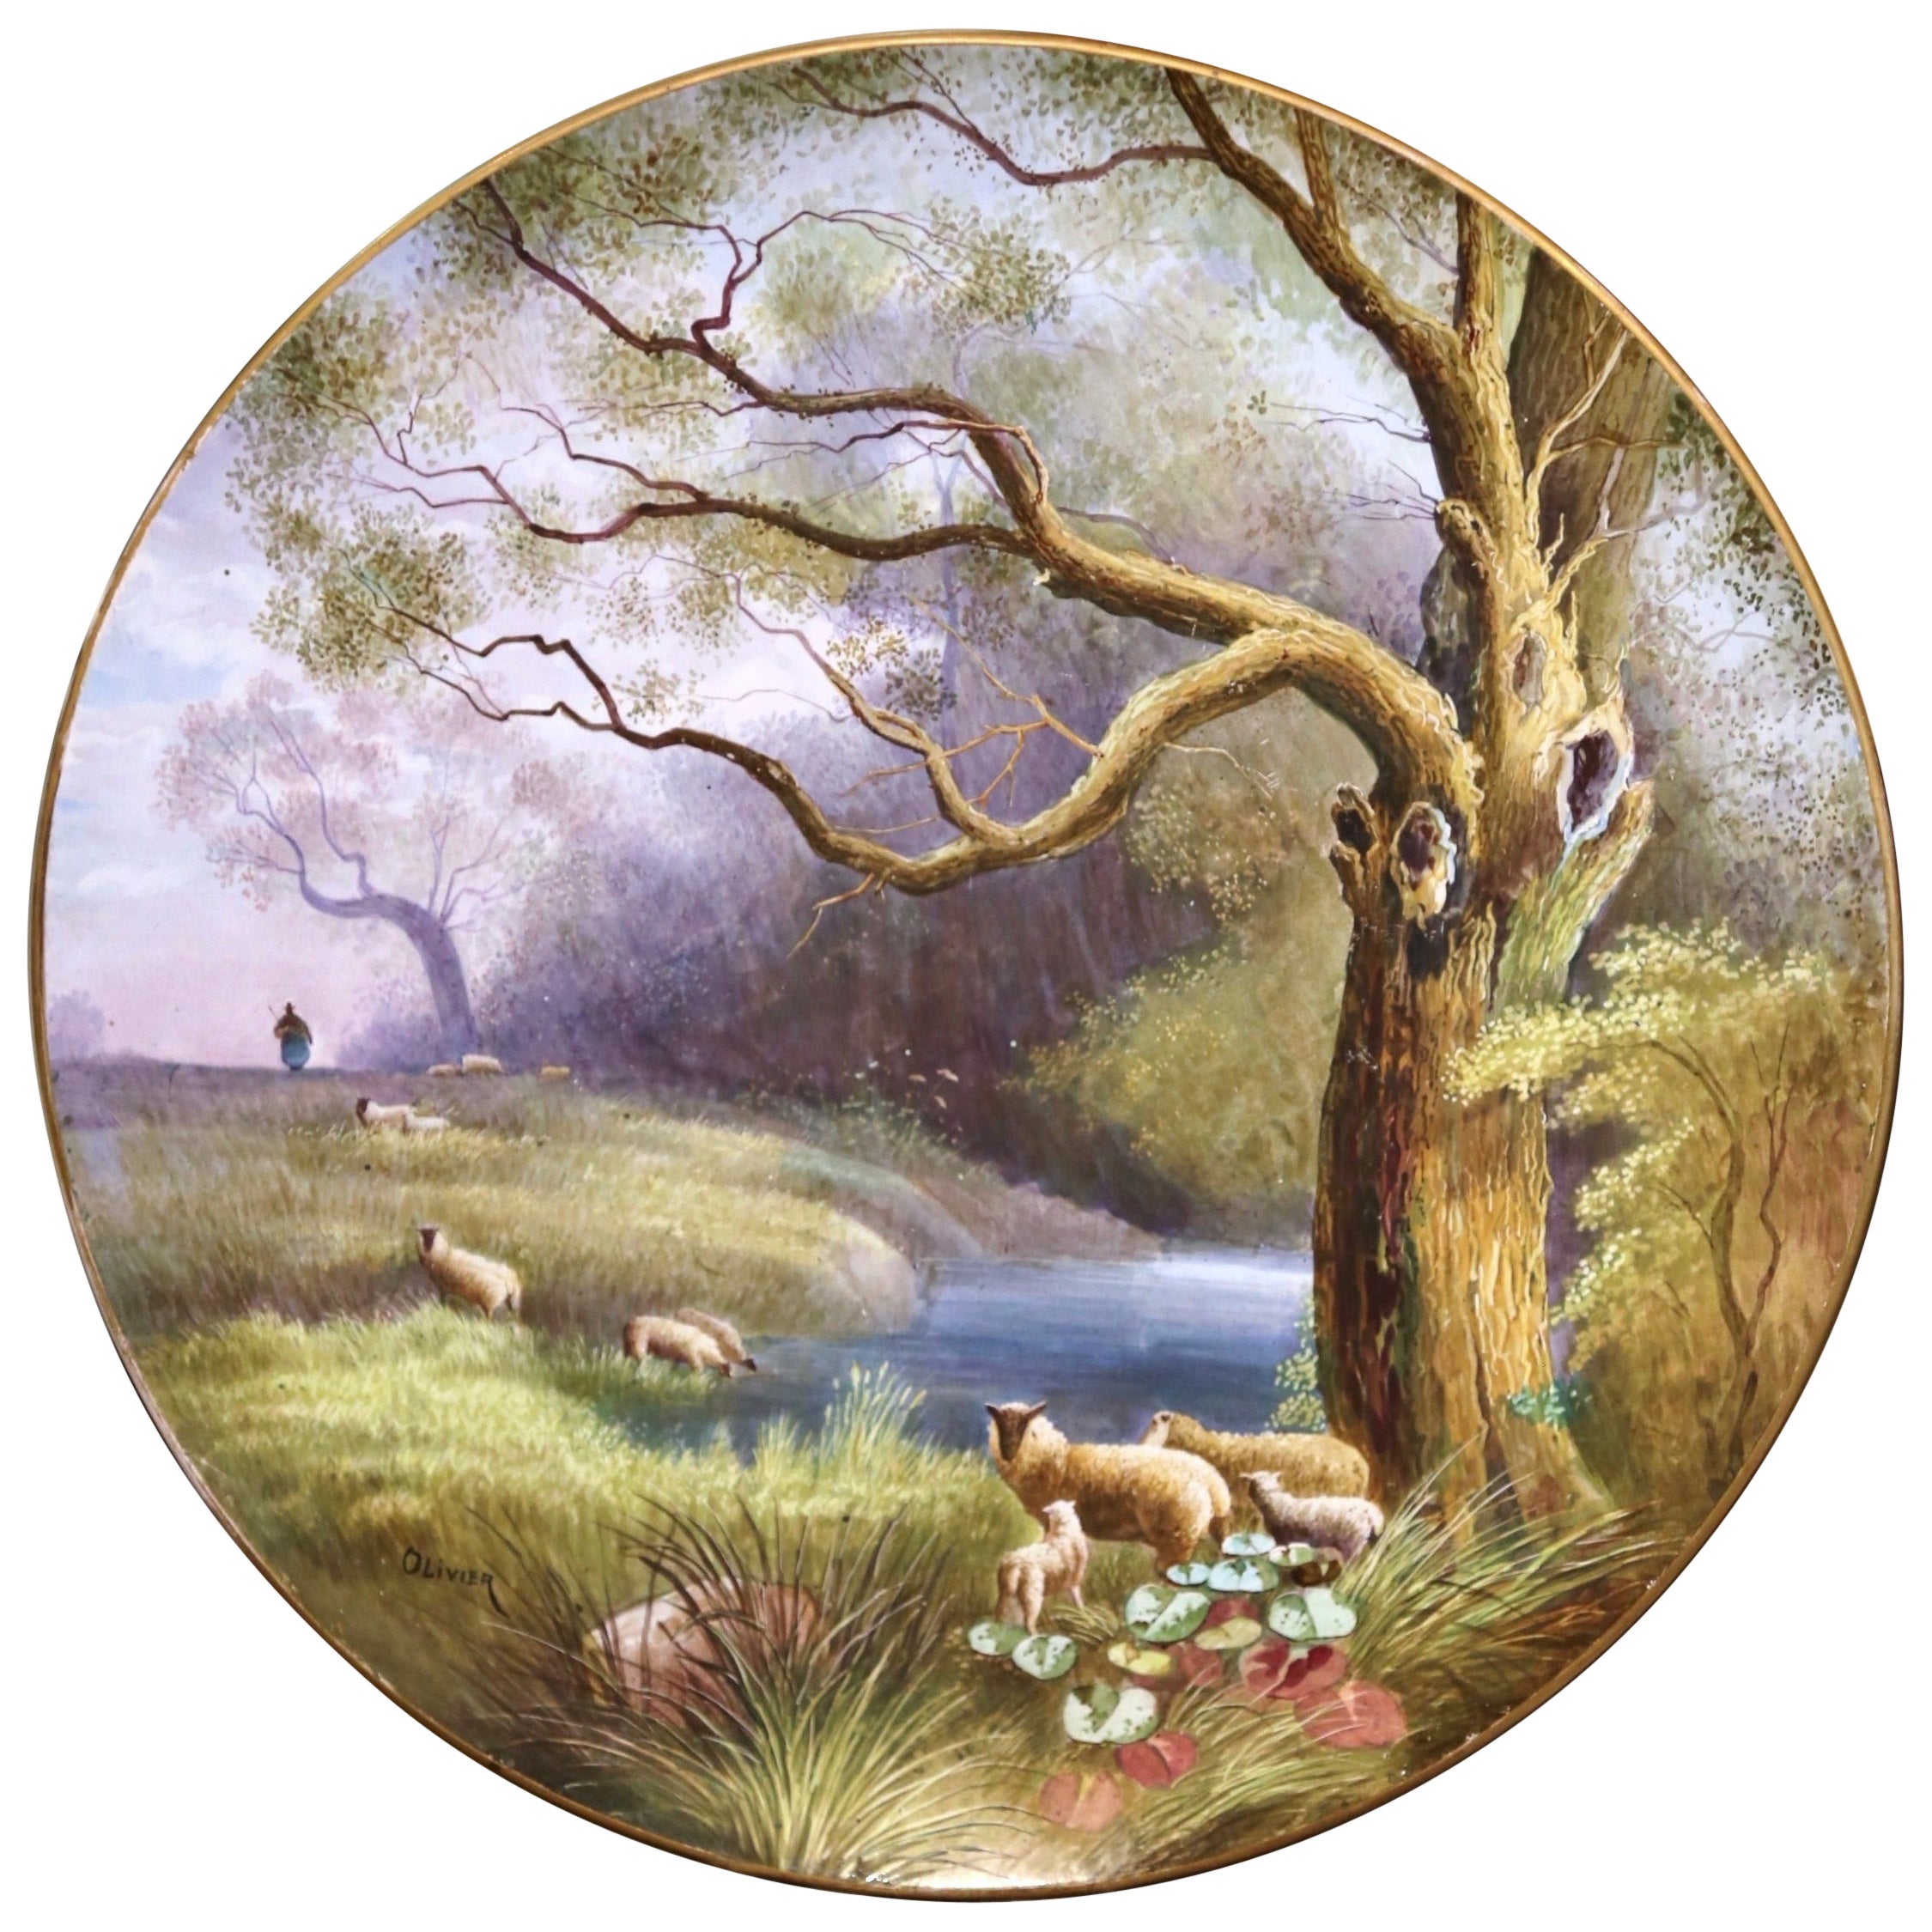  19th Century Hand Painted Porcelain Wall Platter with Sheep Signed Olivier